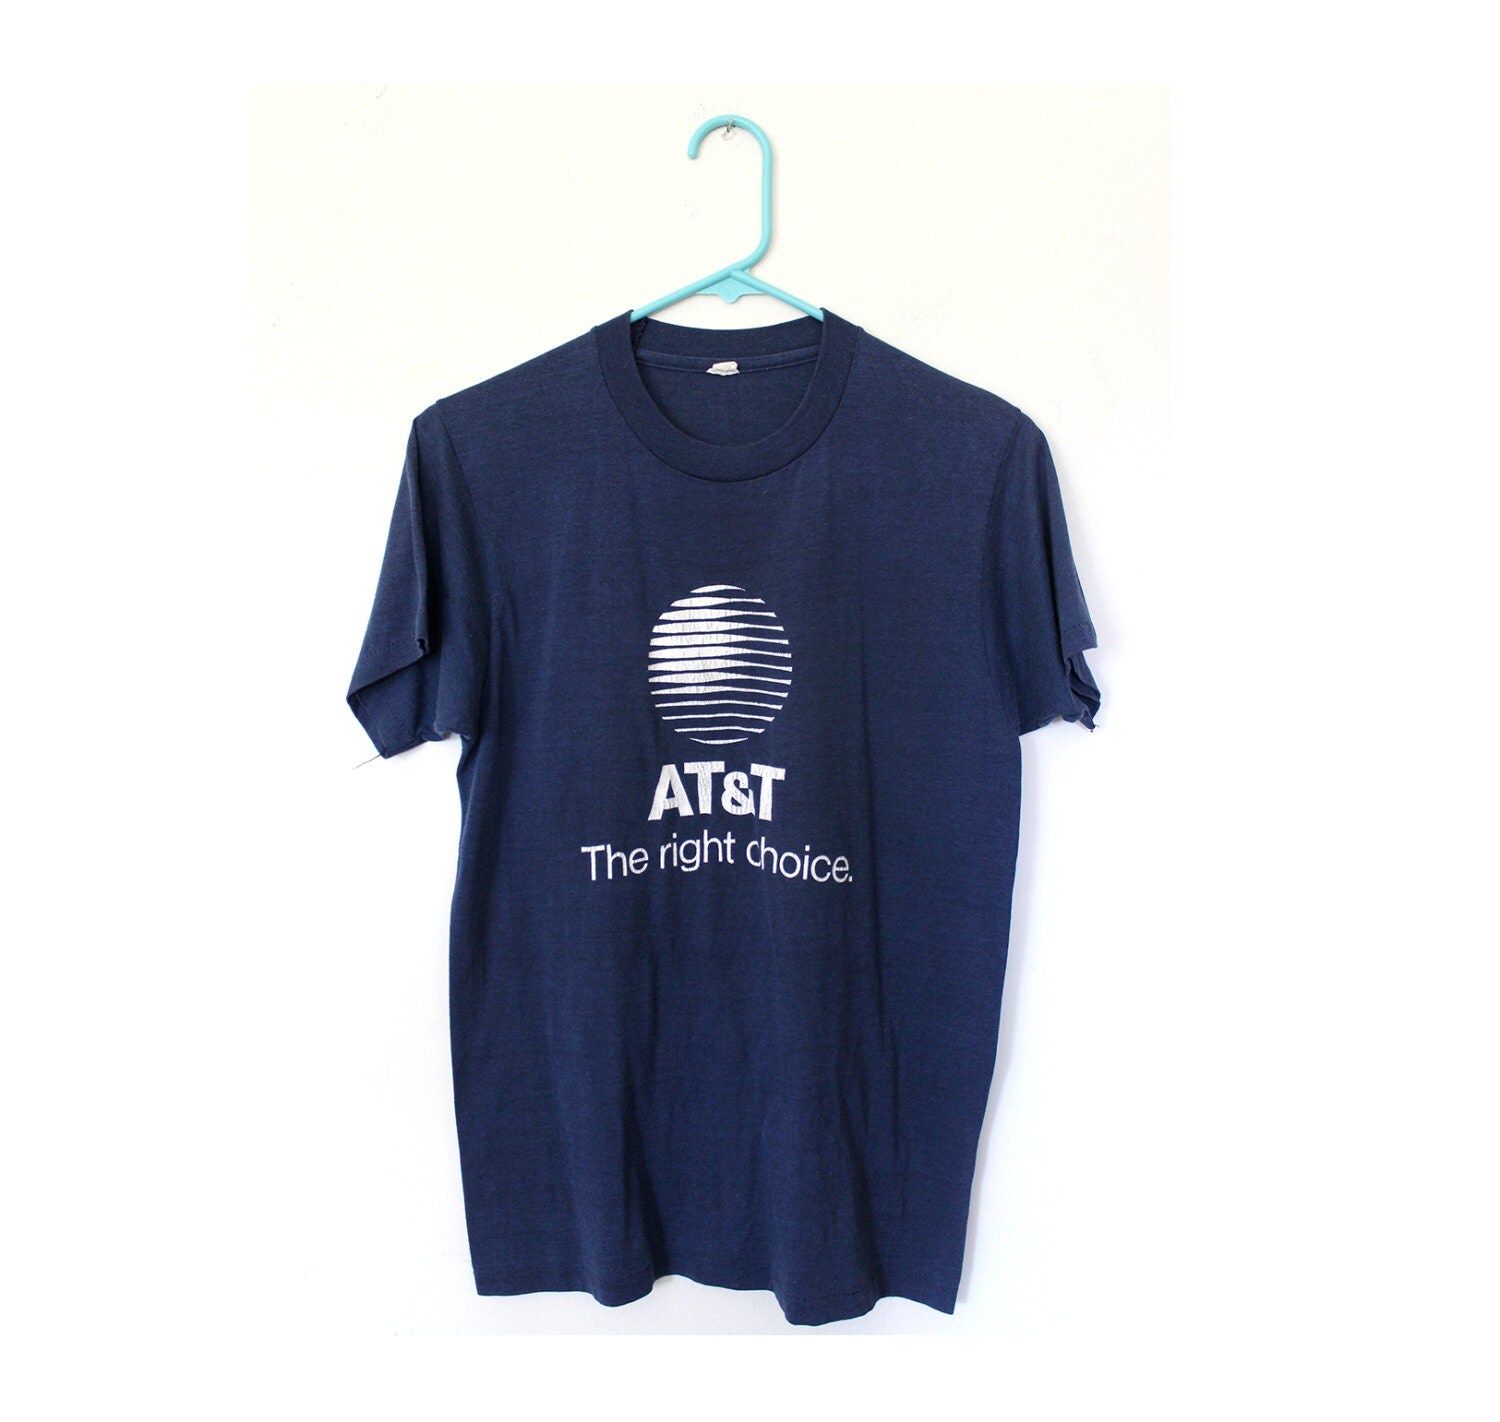 Vintage Navy AT&T Tee Shirt Mens Unisex Small by heartcity on Etsy